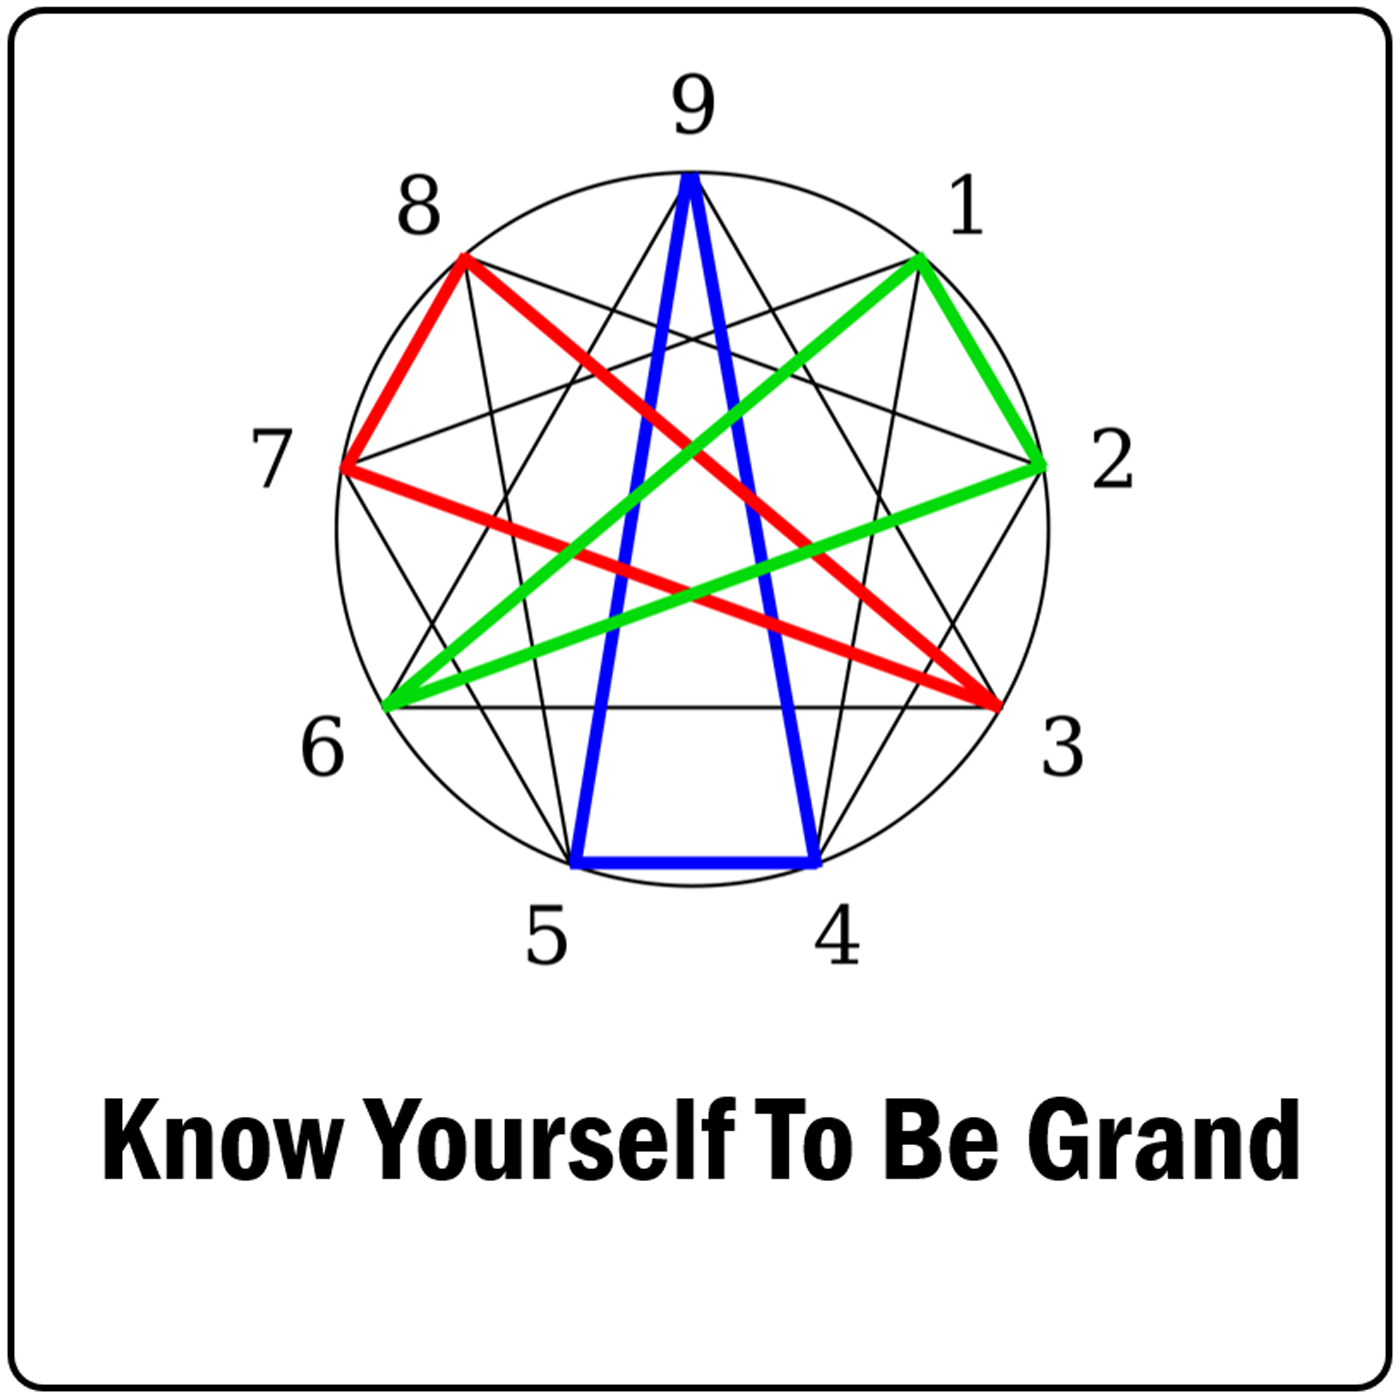 Know Yourself to Be Grand